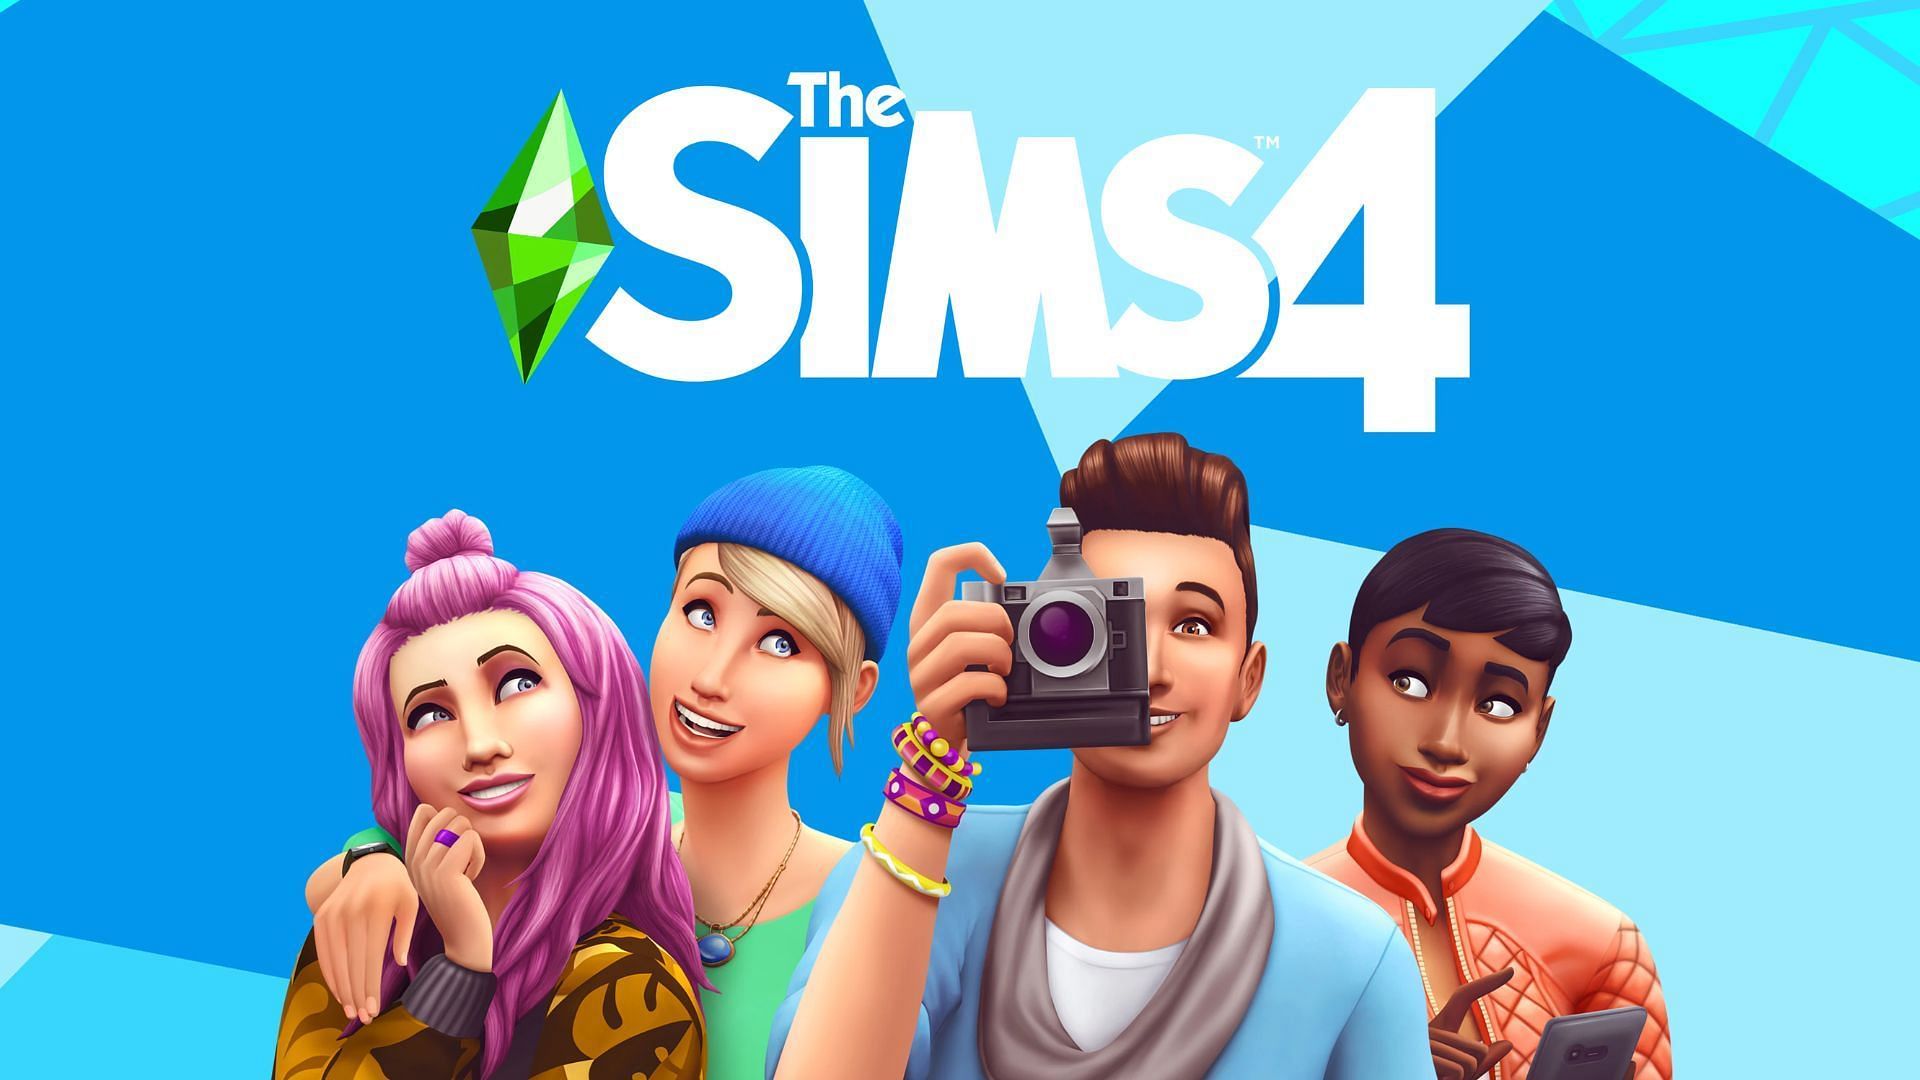 The best laptops to play the Sims 4